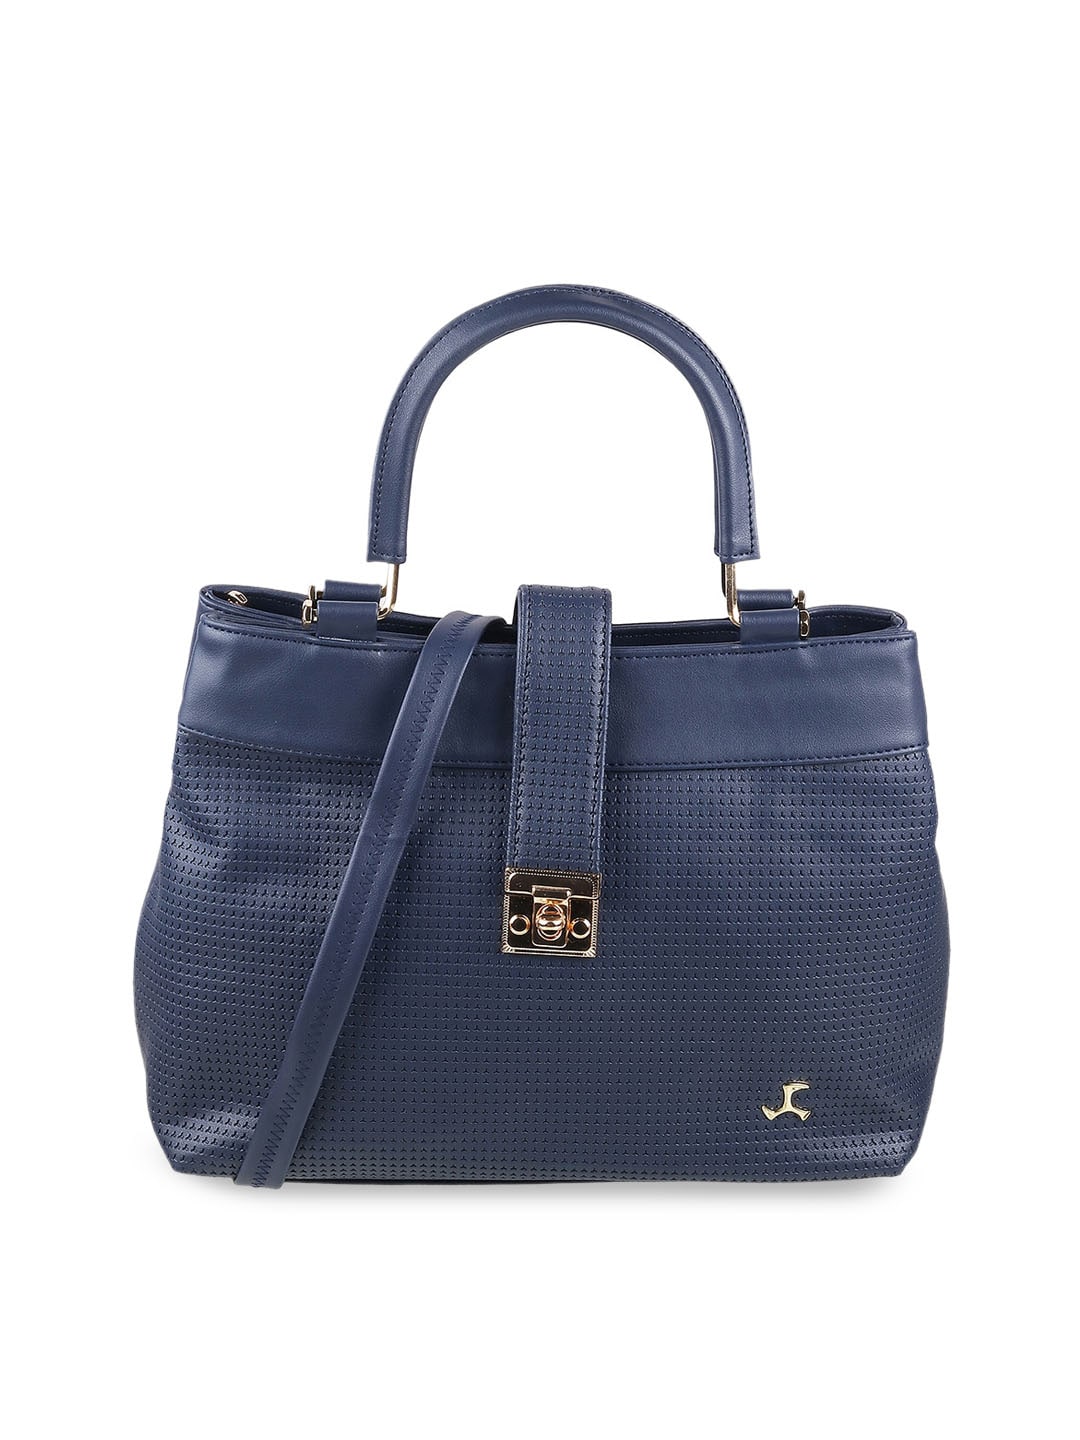 Mochi Blue Structured Handheld Bag Price in India